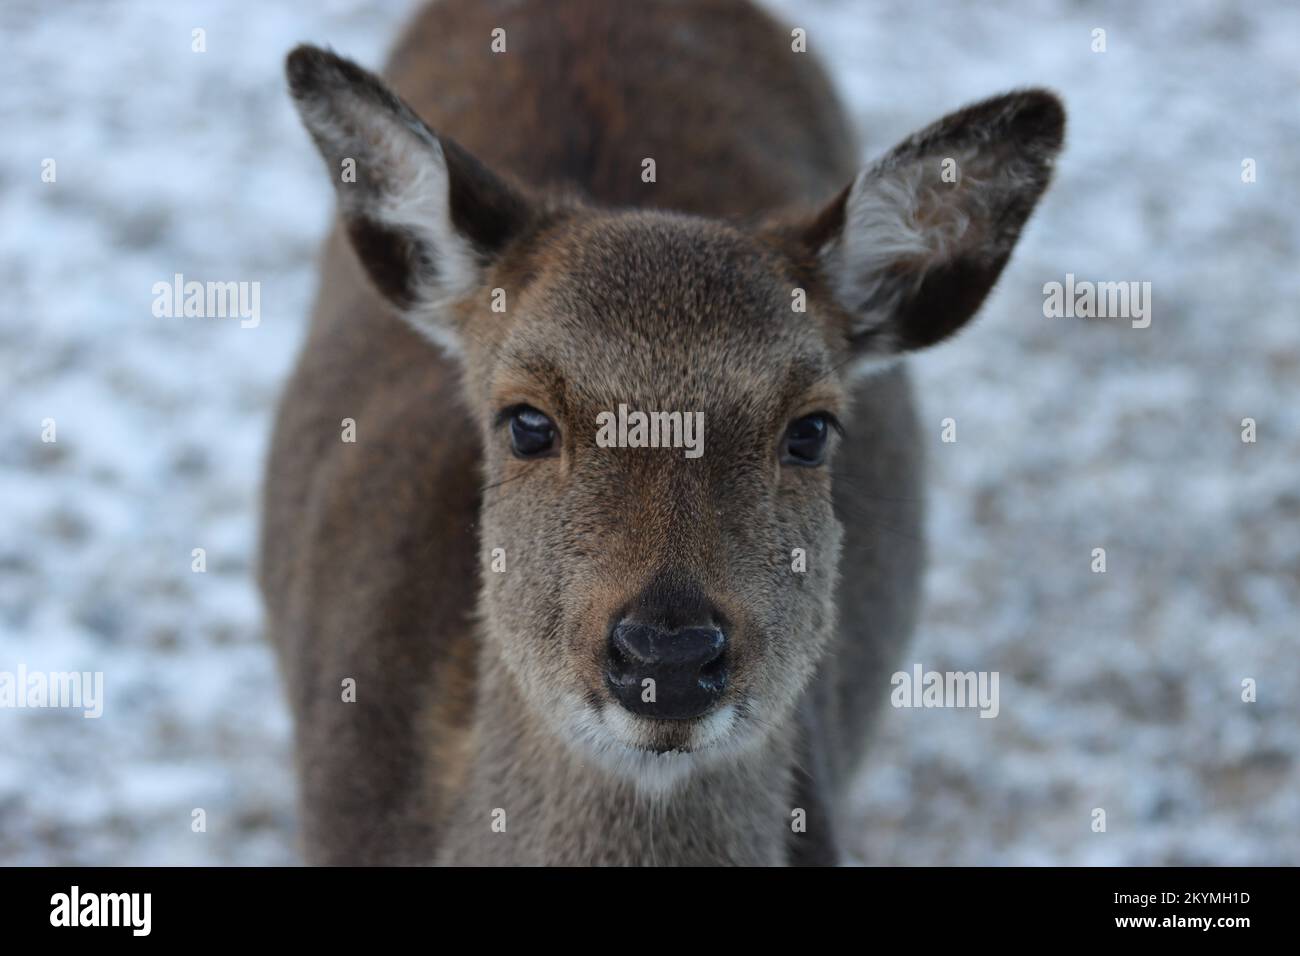 Animal portrait of a young deer with a direct look into the eyes against a white natural blurry background Stock Photo